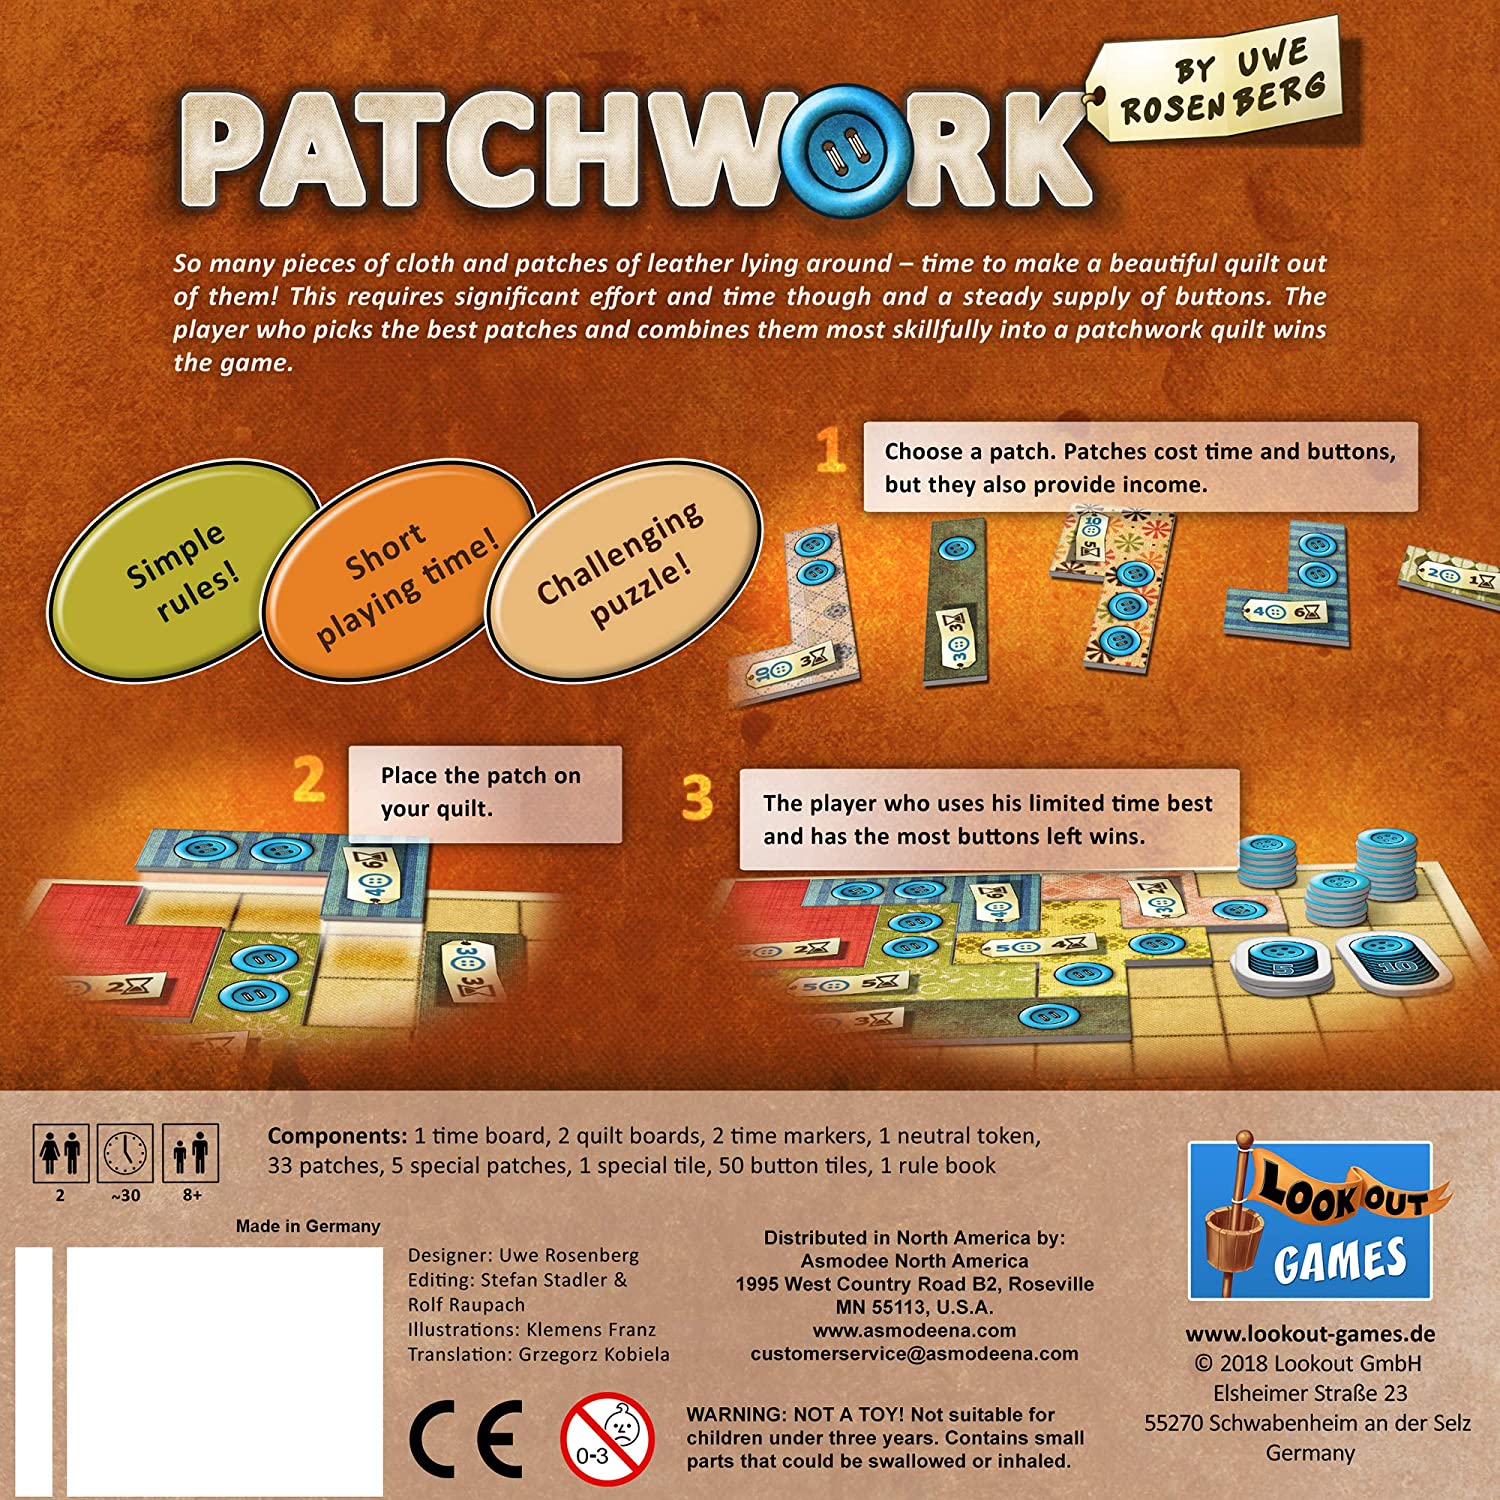 Where to buy Patchwork